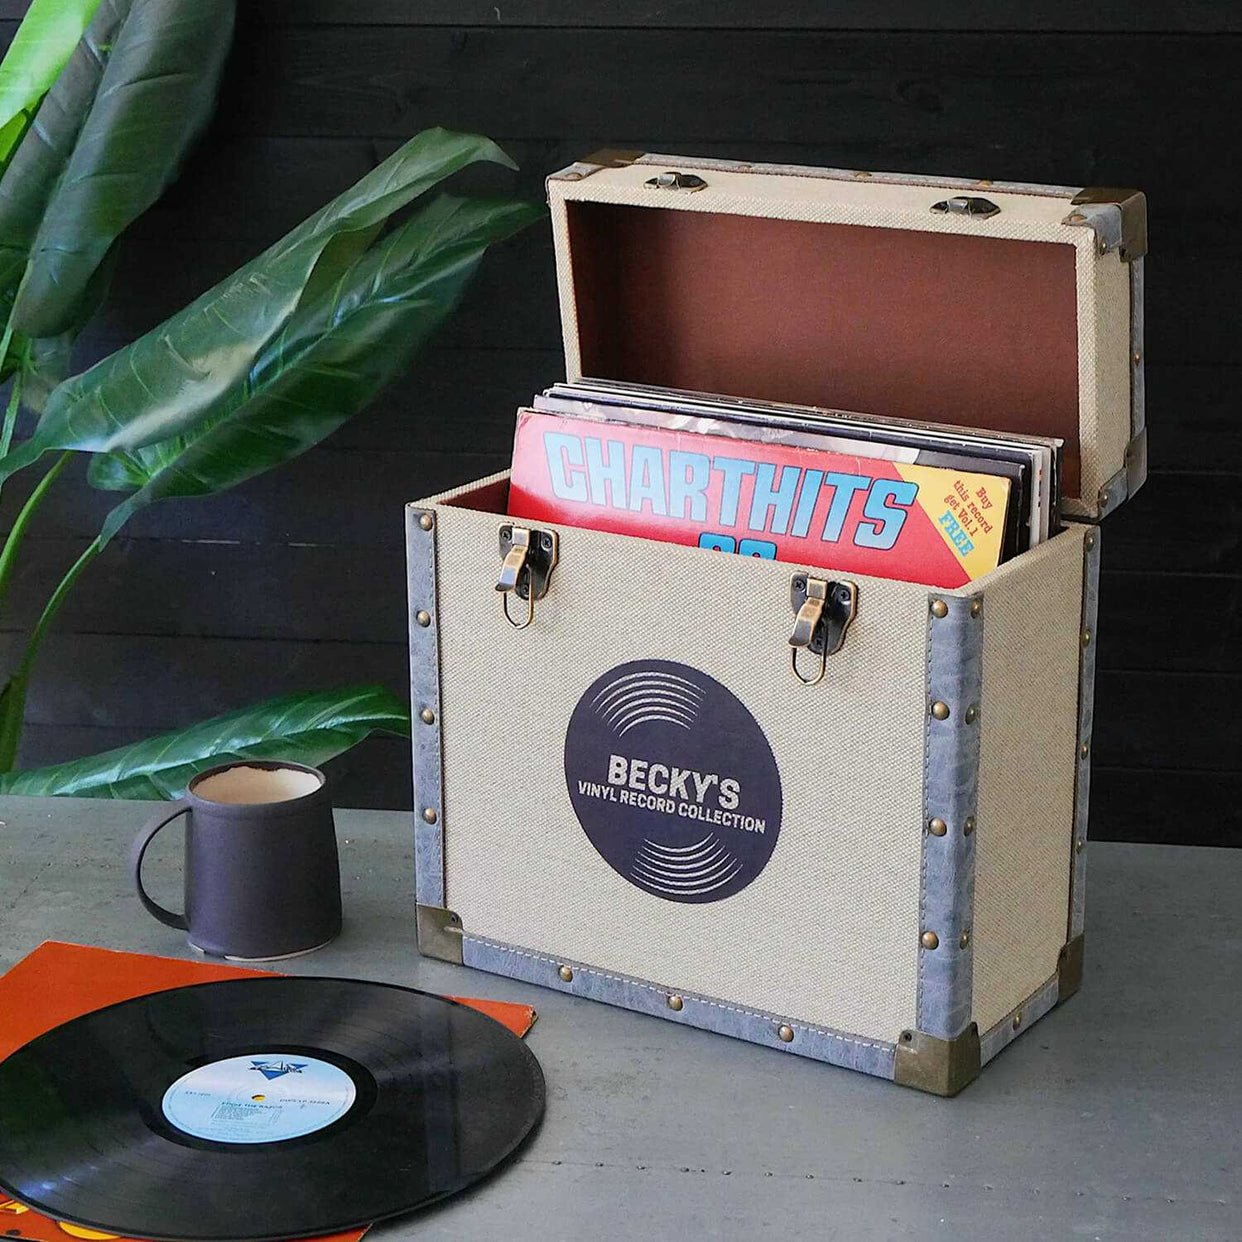 Personalised Music Record Vinyl Storage Box - 12 inch - Cream Cloth - Stores up to 50 records